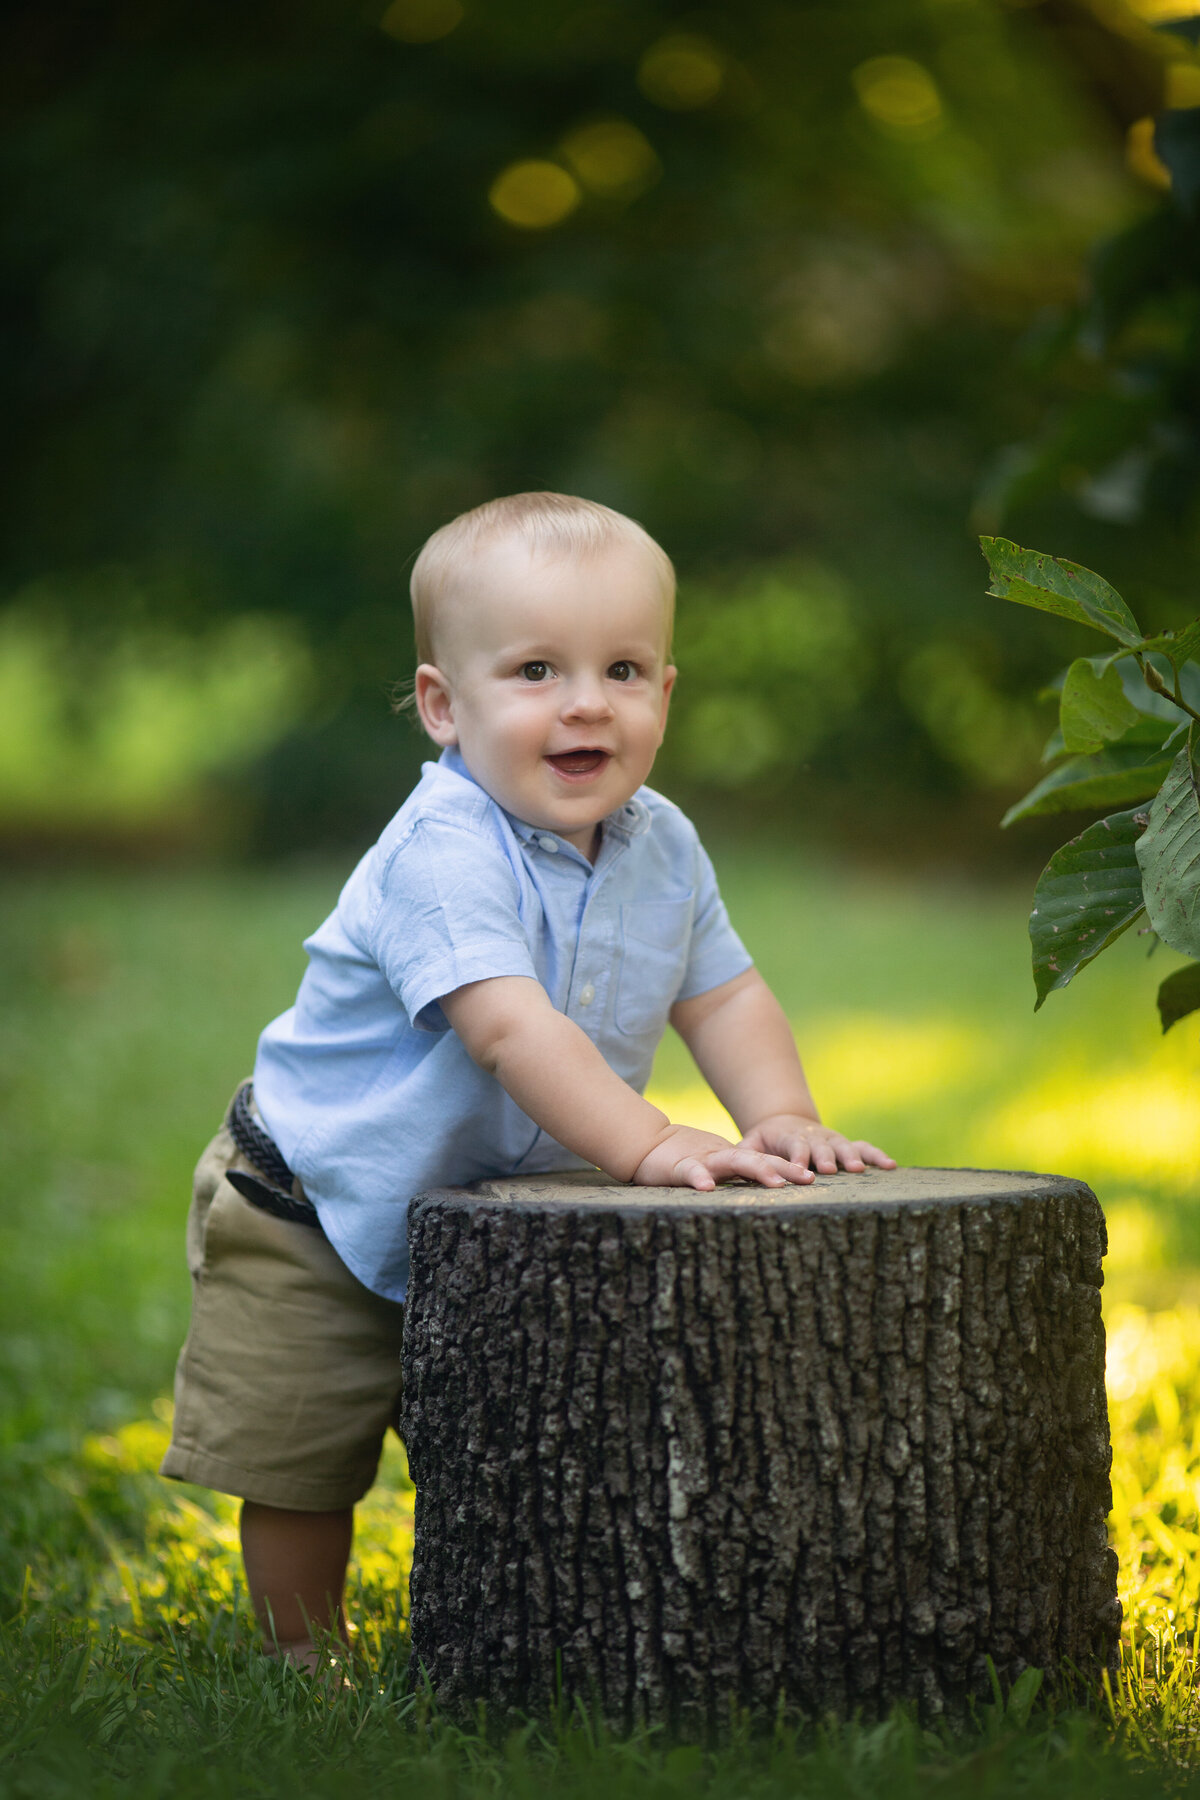 A young toddler boy in a blue button down shirt leans on a stump in a park